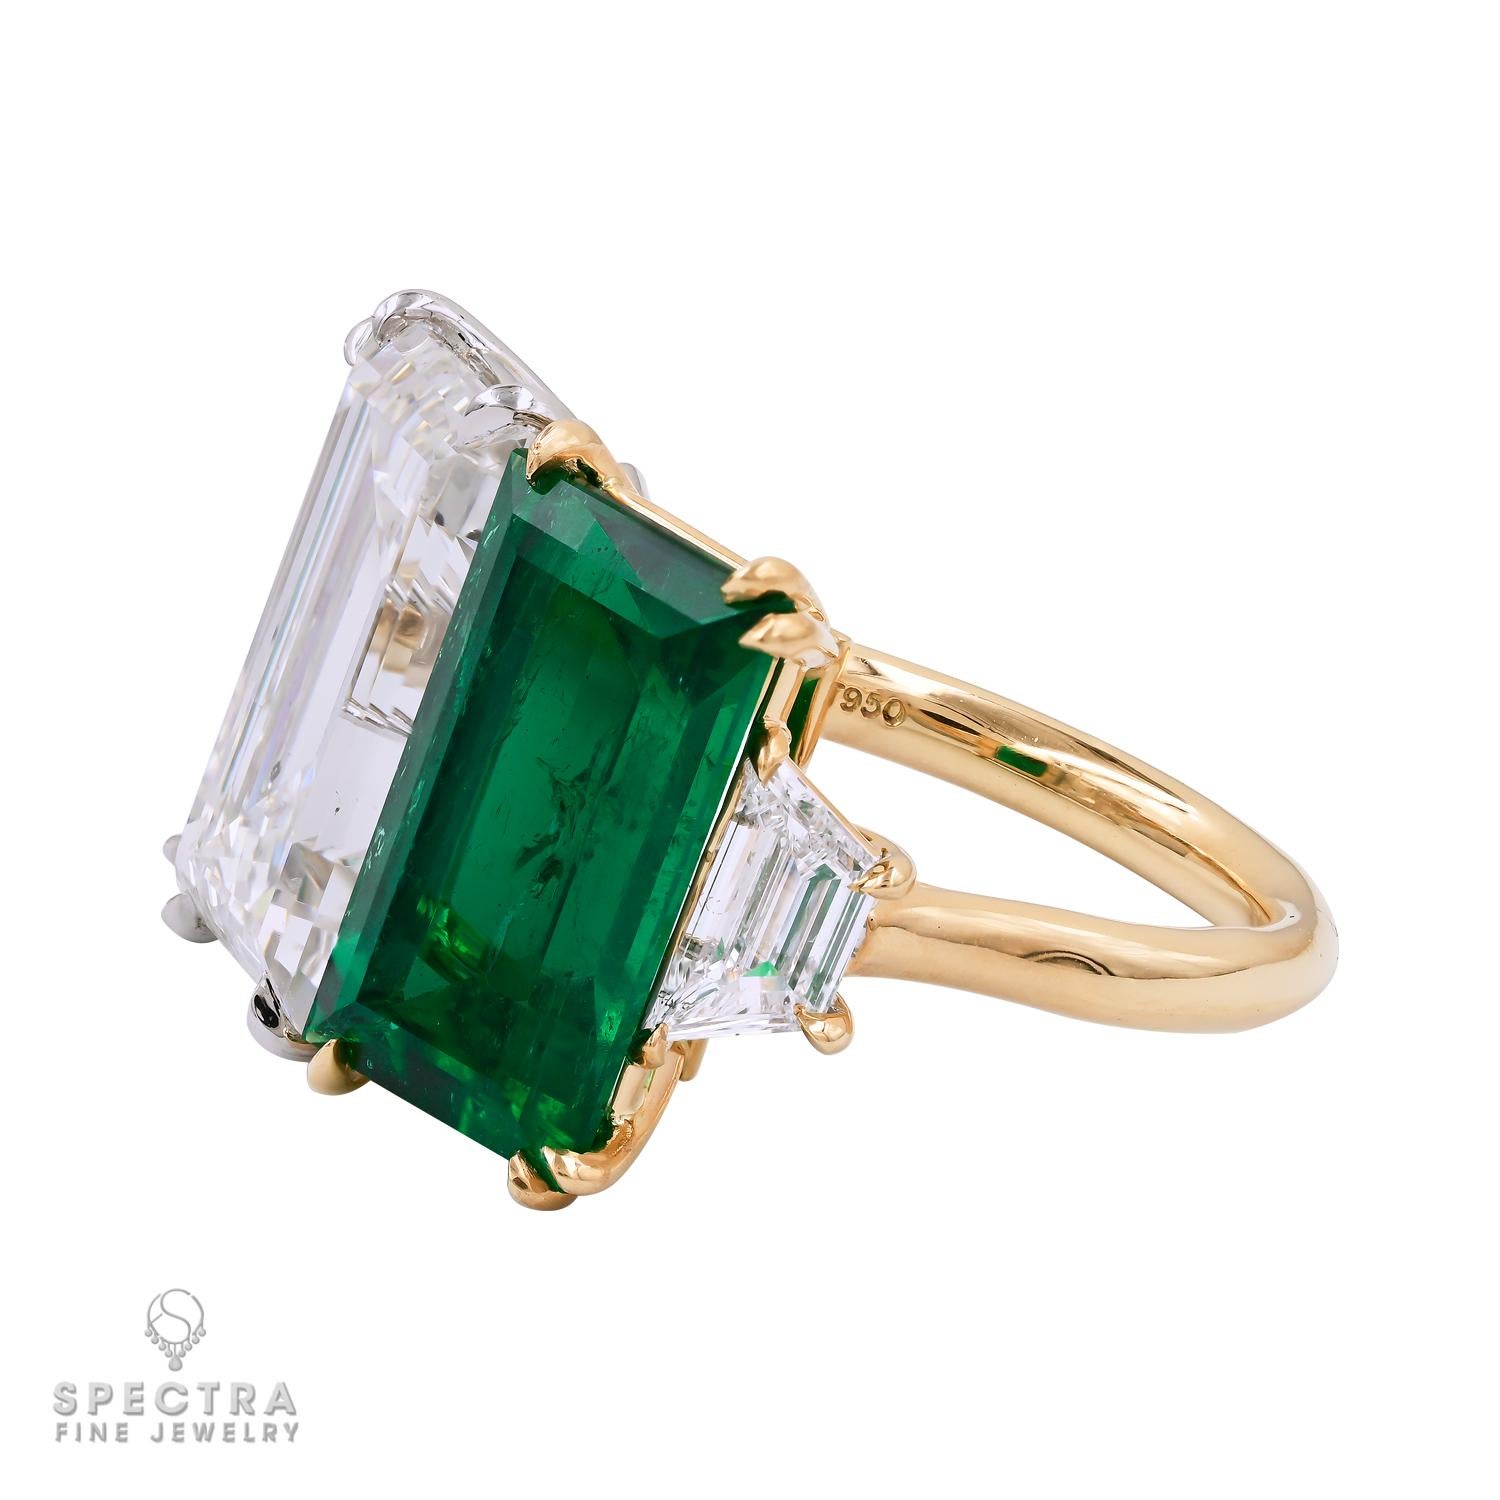 This extraordinary ring is the epitome of luxury and sophistication, boasting a magnificent 7.79-carat emerald-cut H SI2 diamond, impeccably certified by GIA and expertly nestled within the brilliance of platinum.

In perfect harmony with this